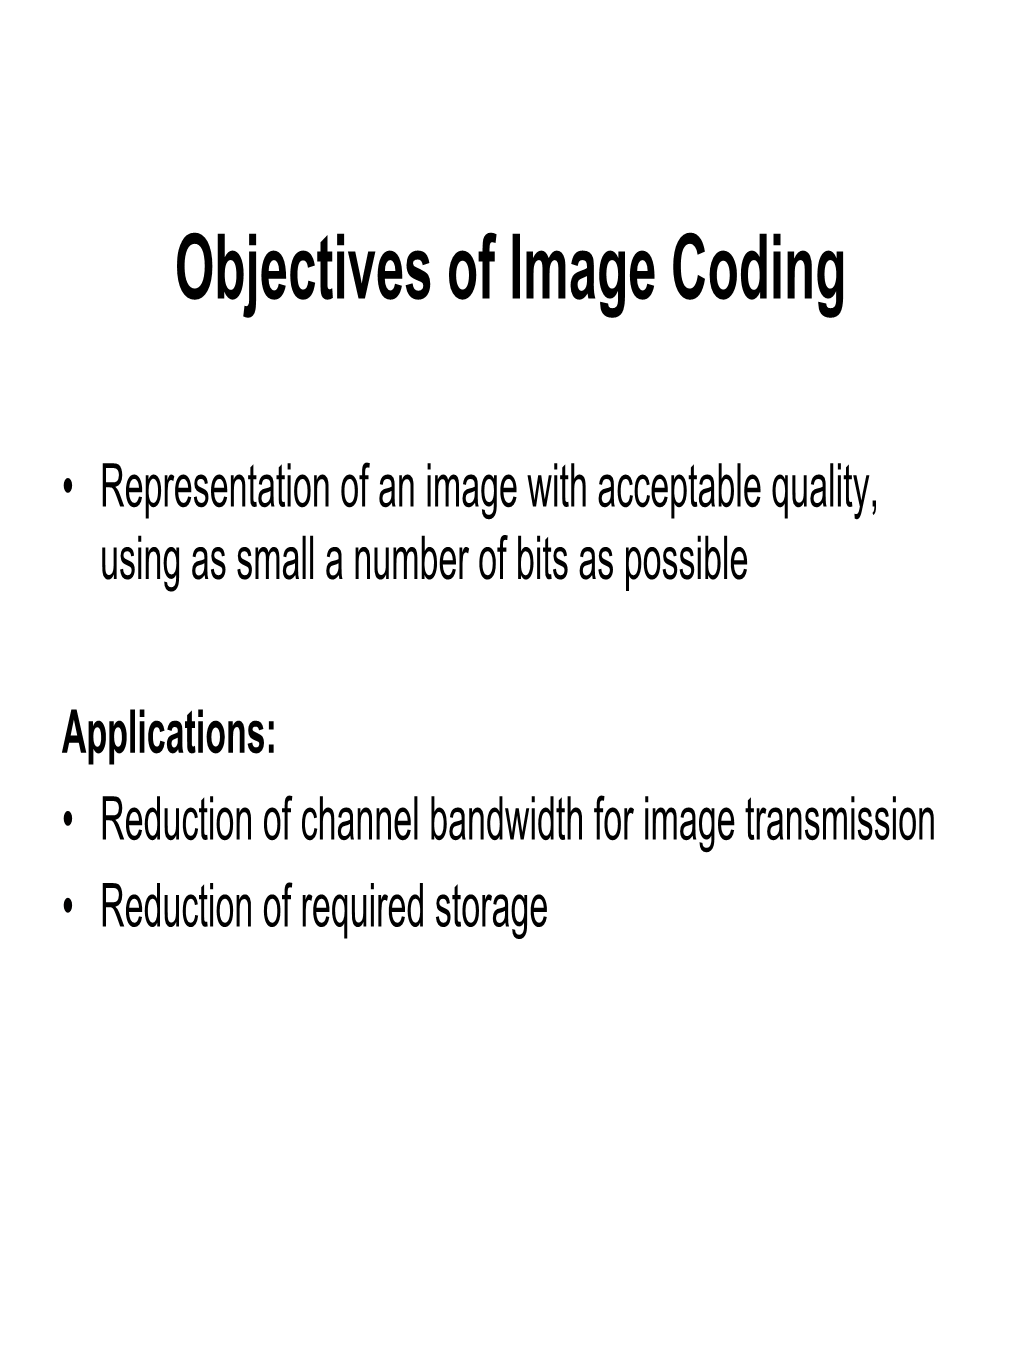 Objectives of Image Coding